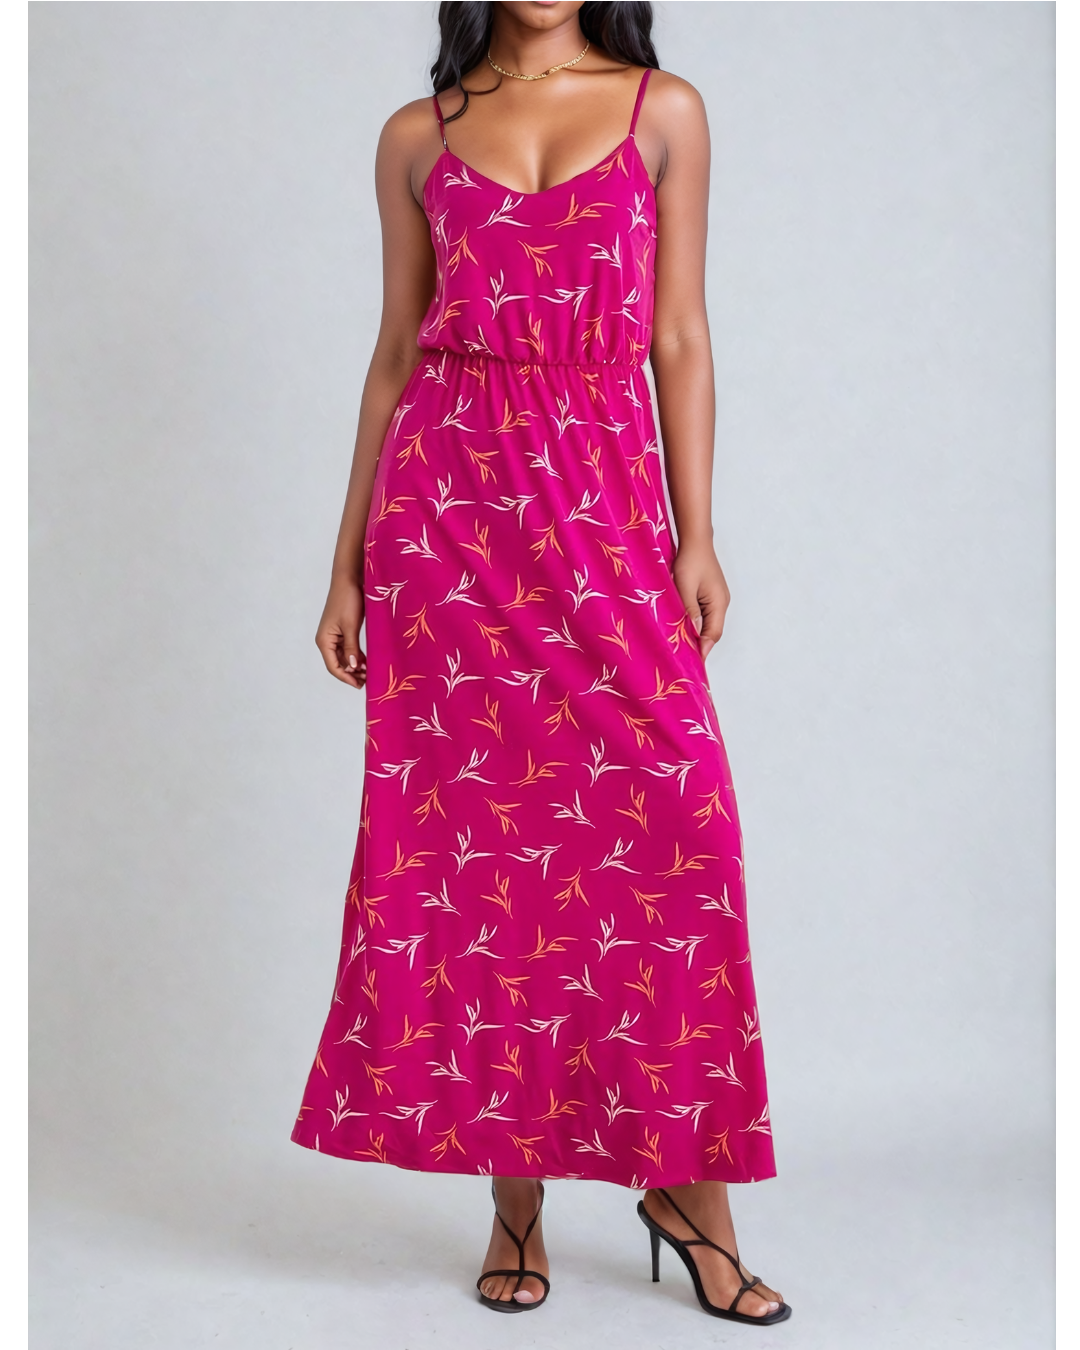 Image of a woman wearing a Fly Away Cami Maxi Dress in a vibrant floral print, suitable for various occasions, with adjustable straps and a flattering cami neckline.